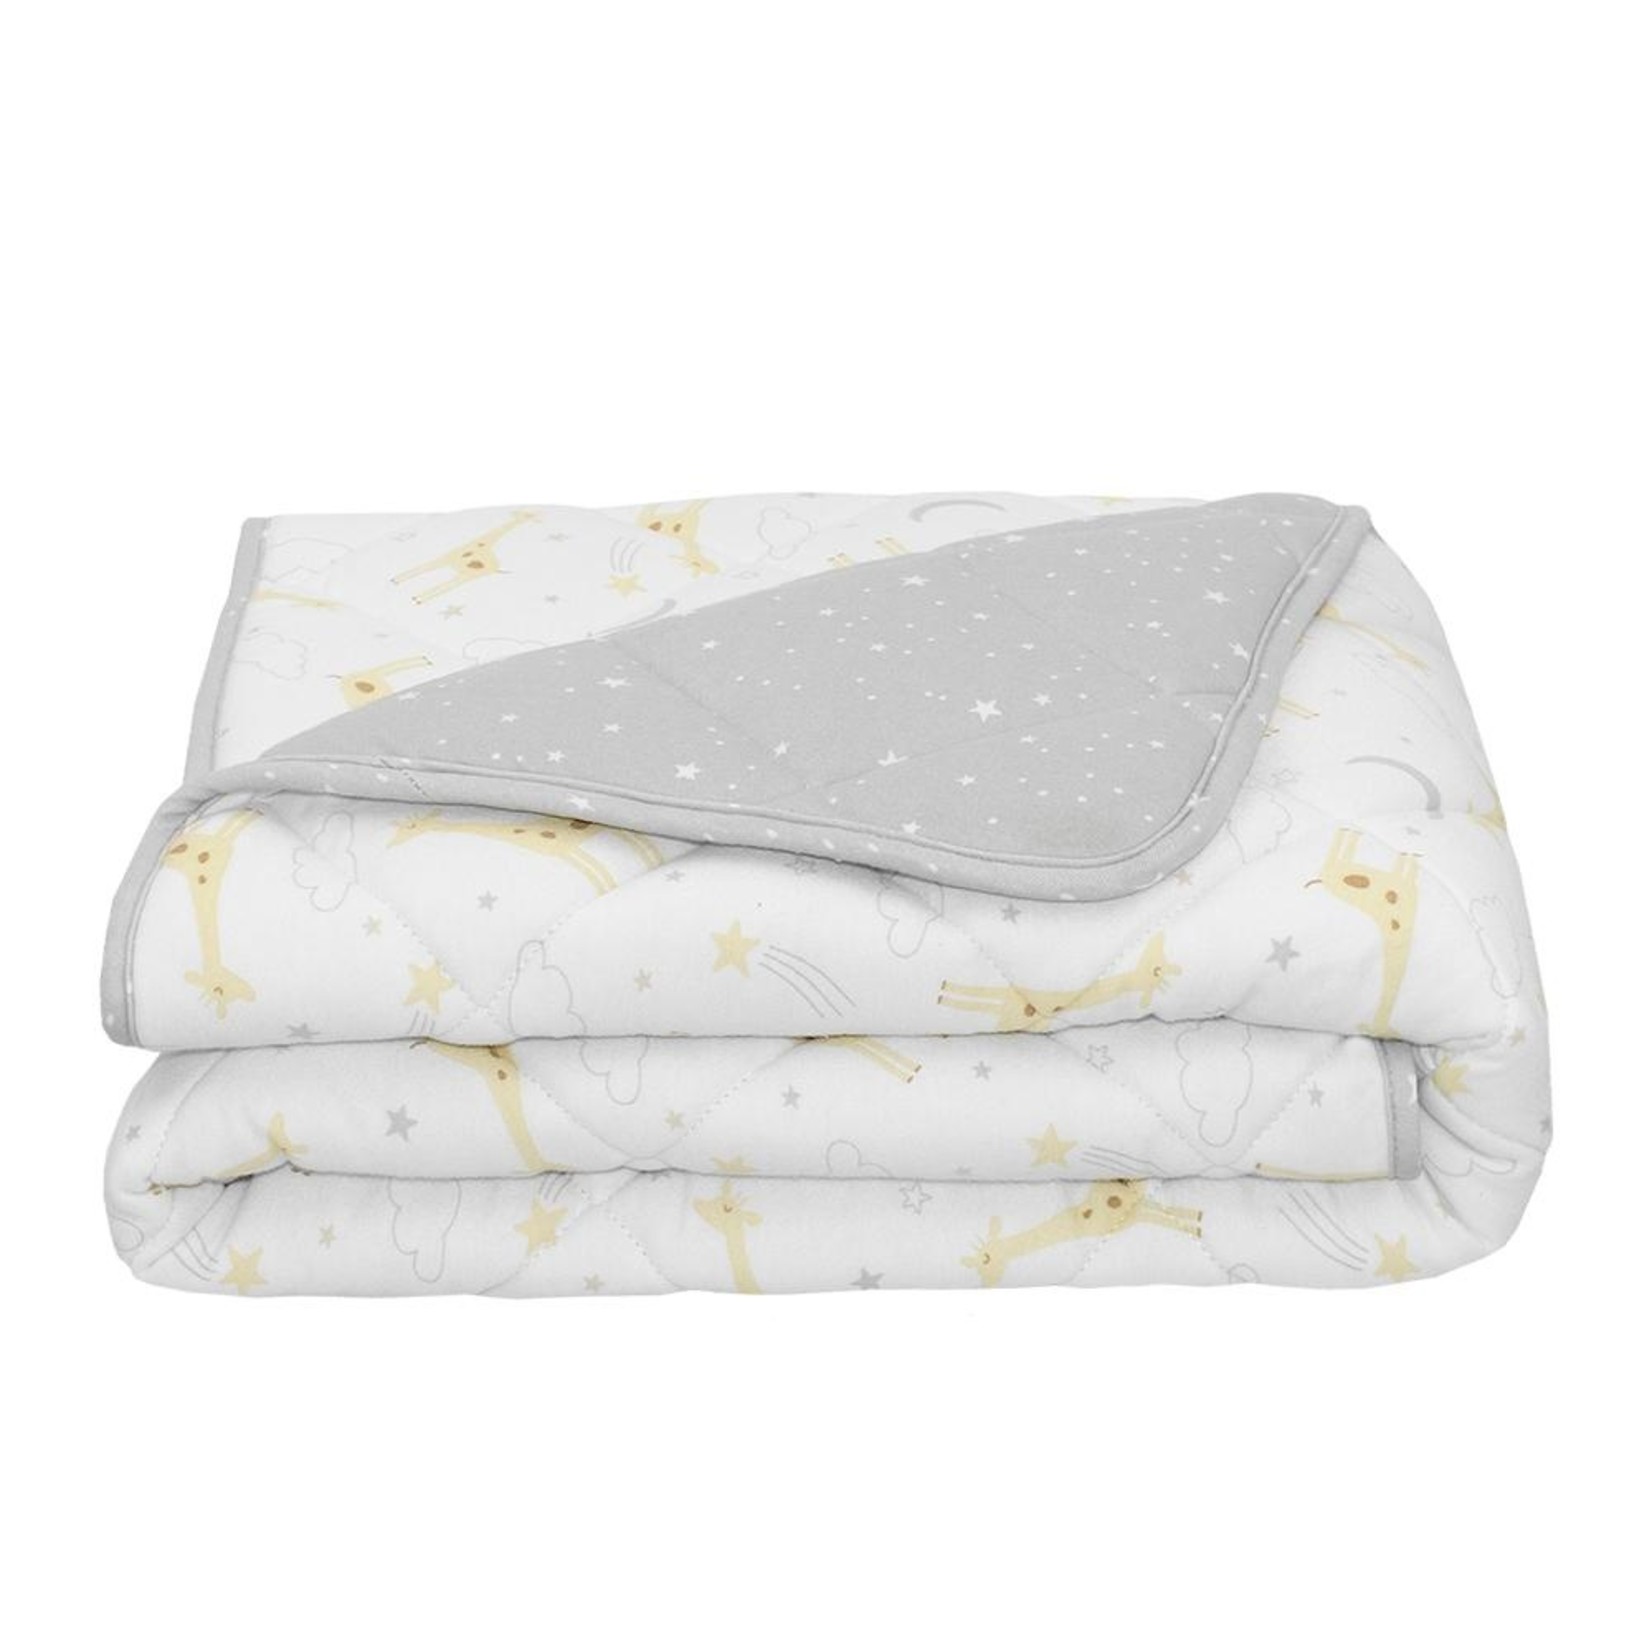 Living Textiles QUILTED COT COMFORTER - NOAH/STARS